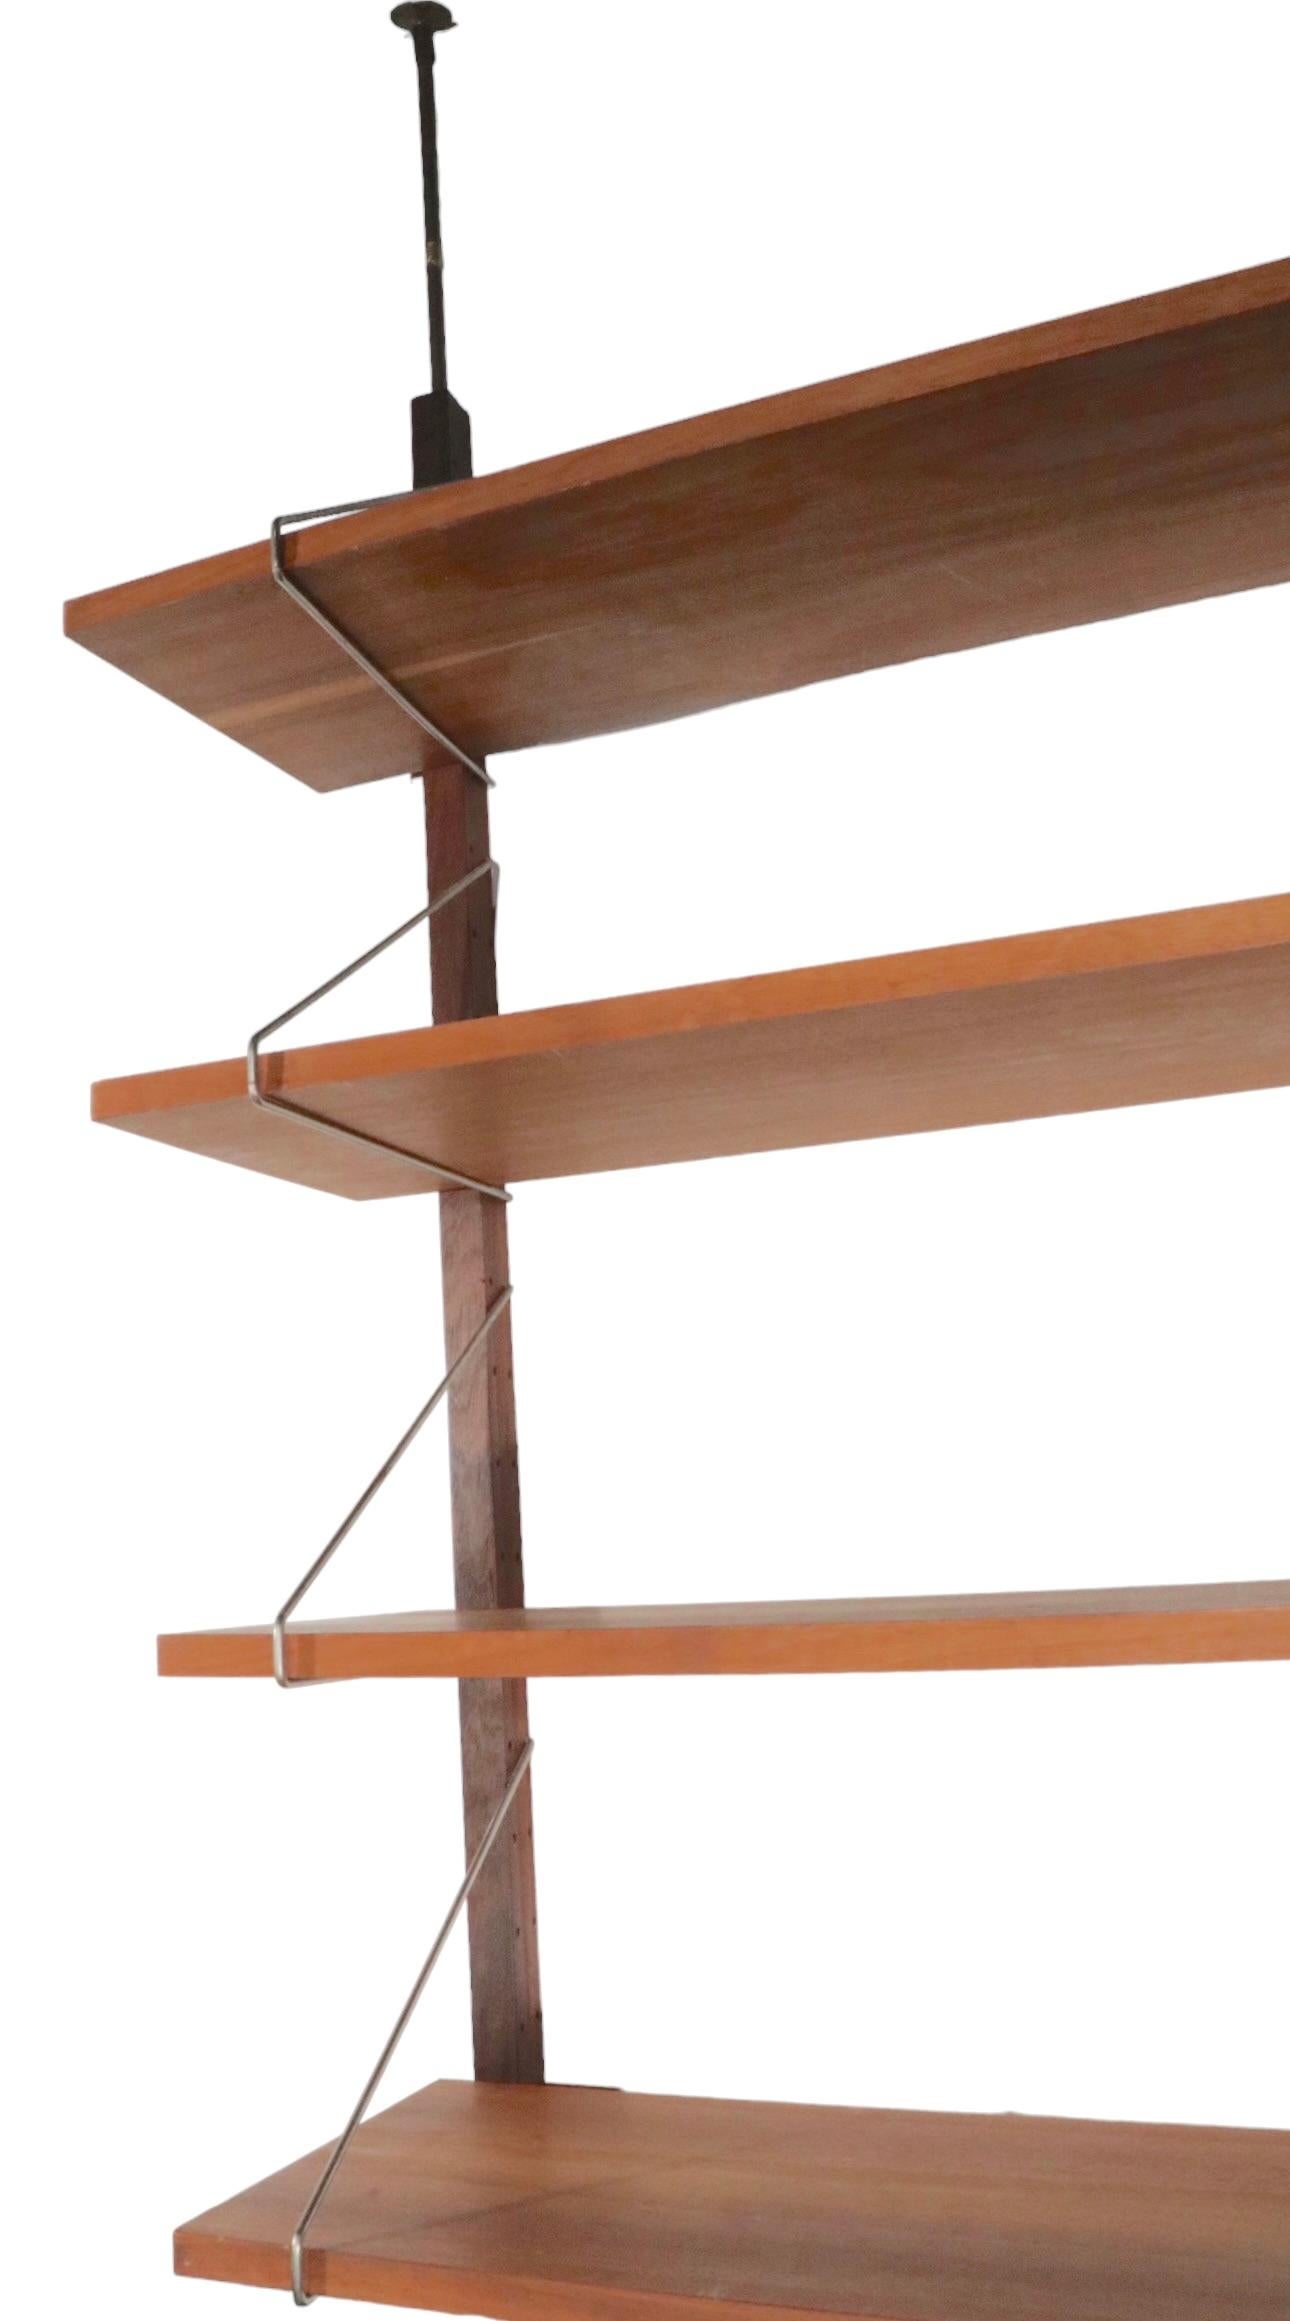 Danish Mid Century Wall Unit with 8 Shelves, circa 1950 - 1960s In Good Condition For Sale In New York, NY